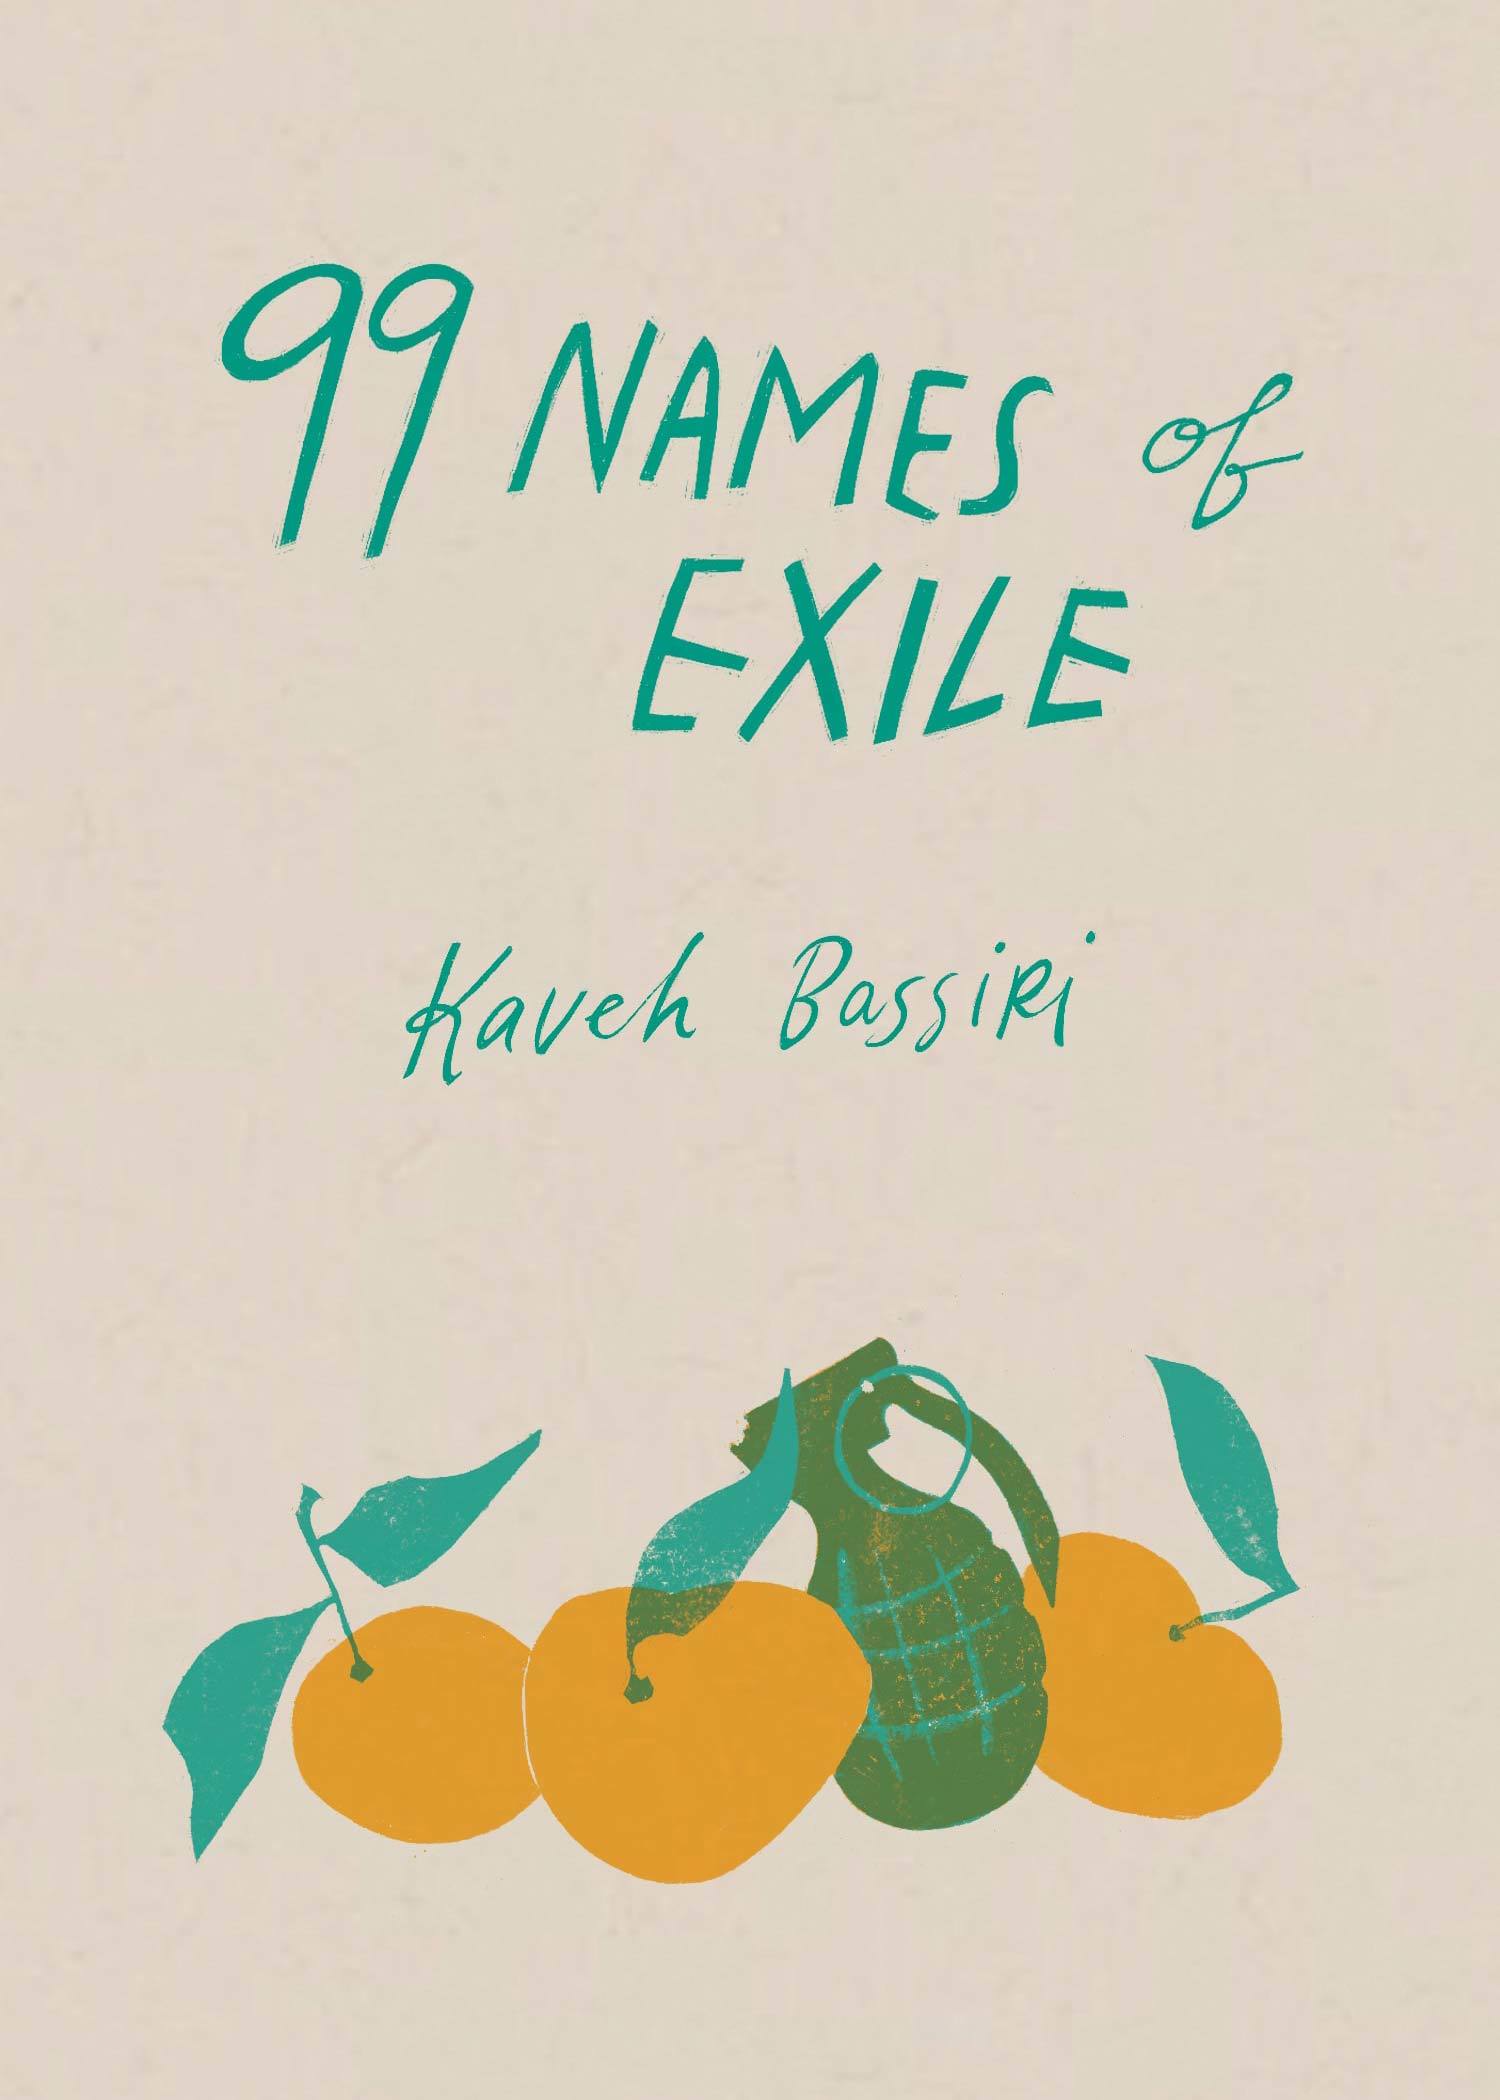 99 Names of Exile